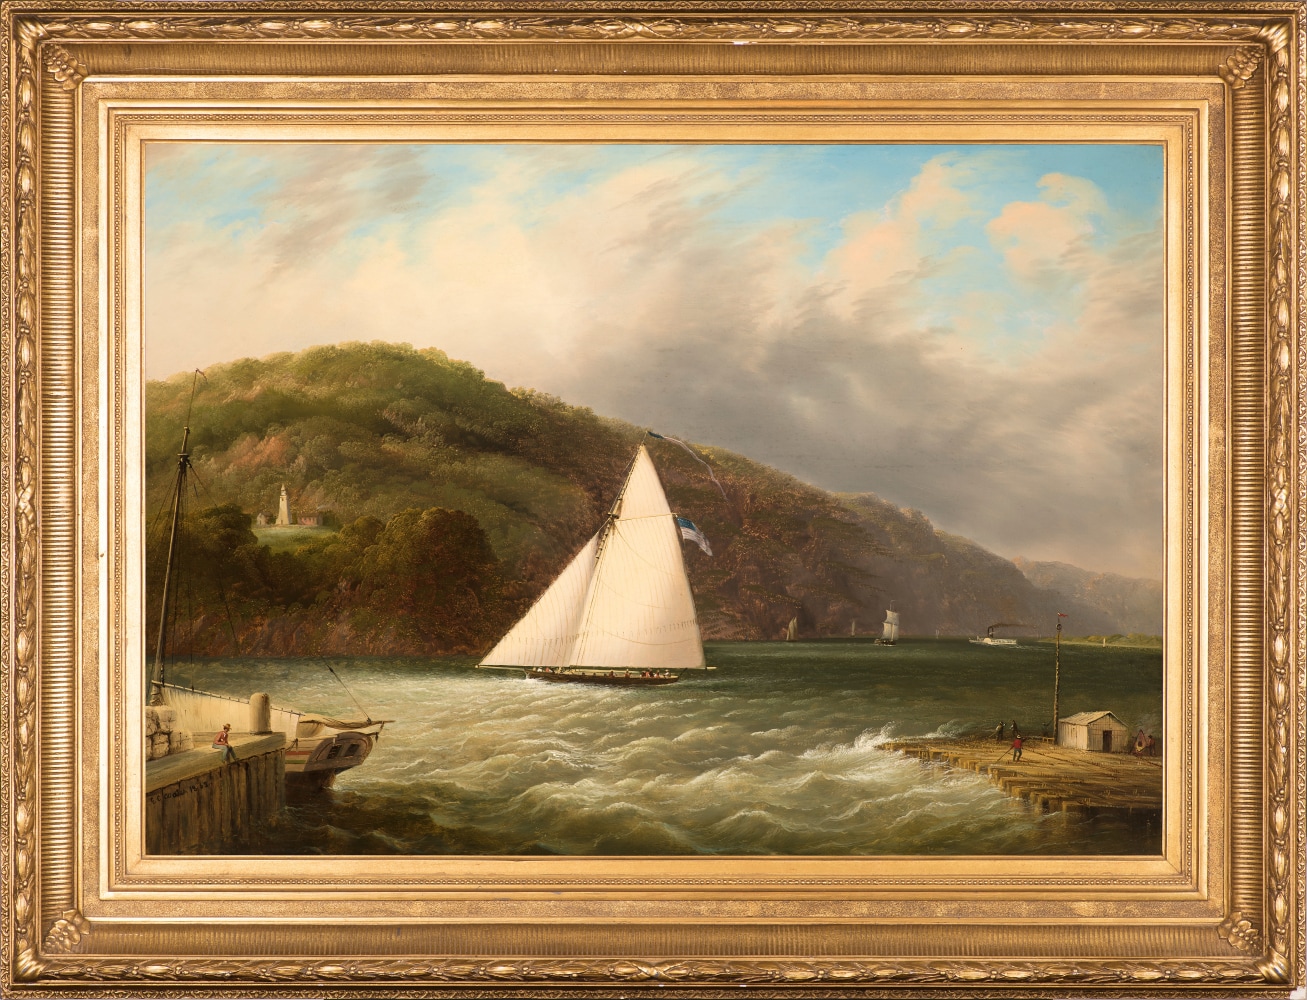 Edmund C. Coates (1816–1871), Yachting on the Hudson, 1863, oil on canvas, 24 x 34 in., signed and dated lower left: E.C. Coates 1863 (framed)